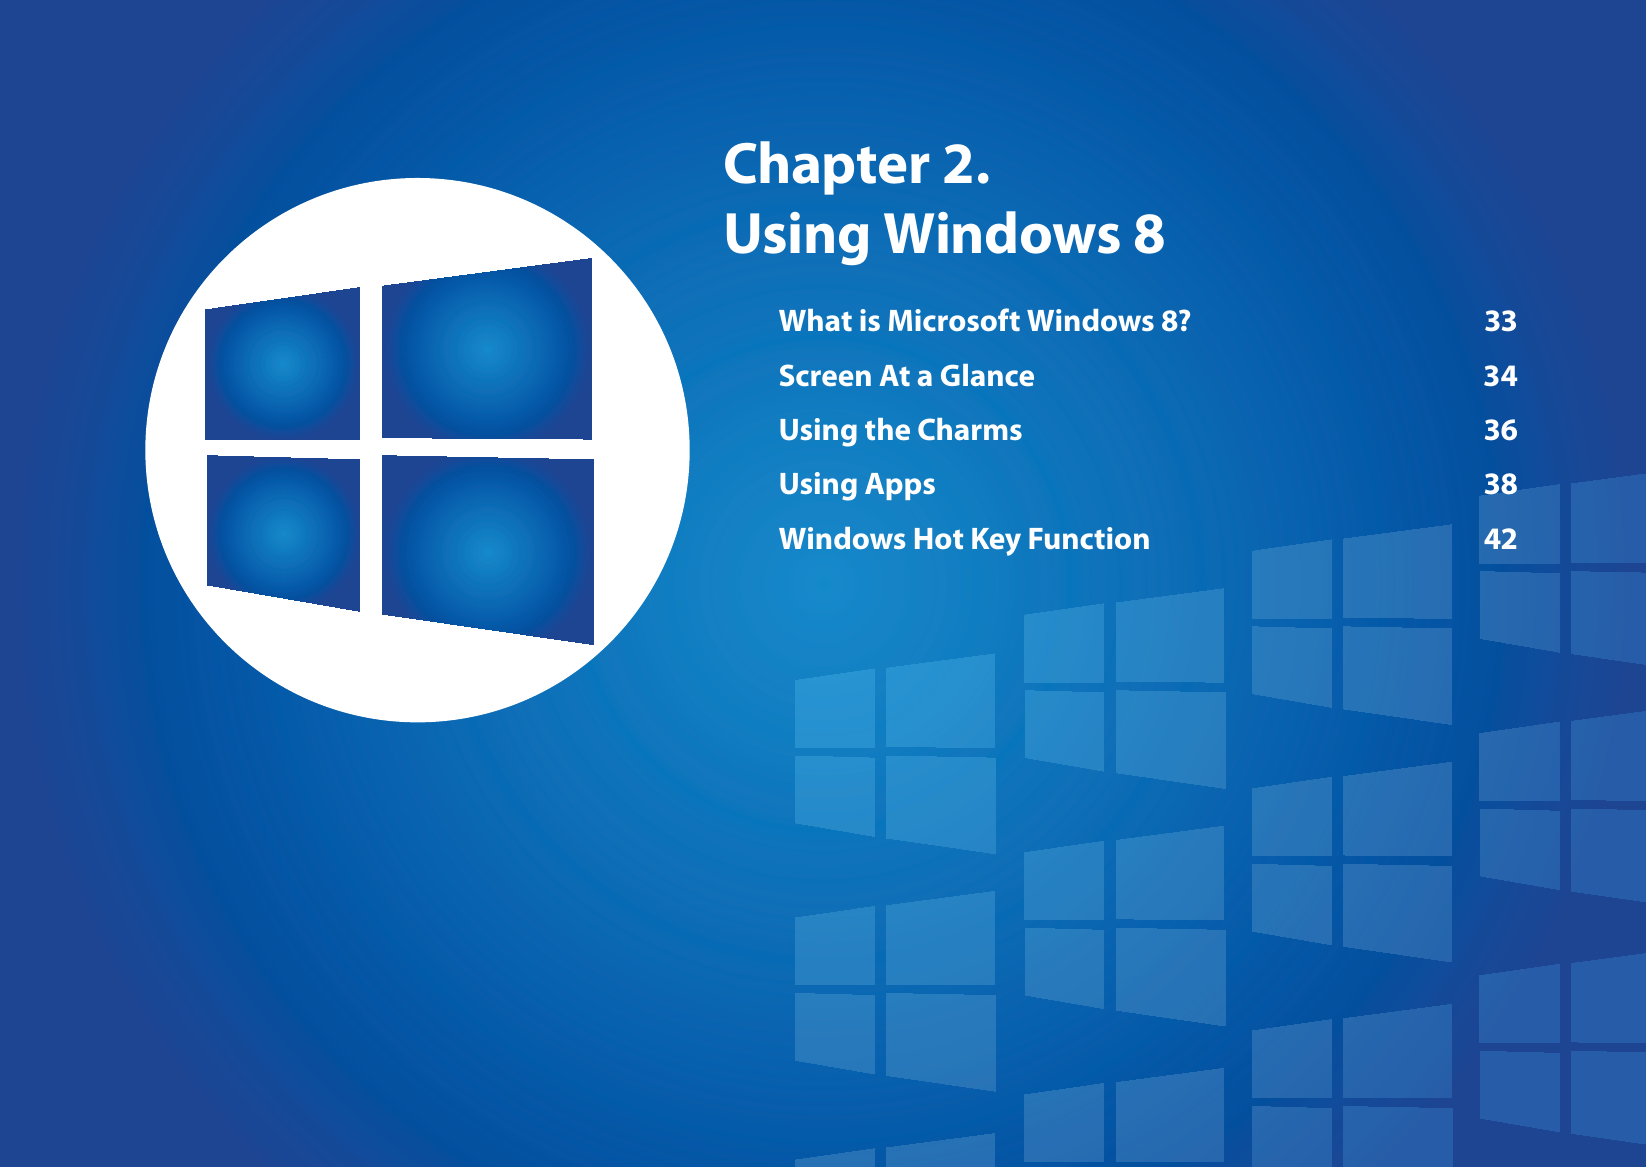 Chapter 2. Using Windows 8What is Microsoft Windows 8?  33Screen At a Glance  34Using the Charms  36Using Apps  38Windows Hot Key Function  42